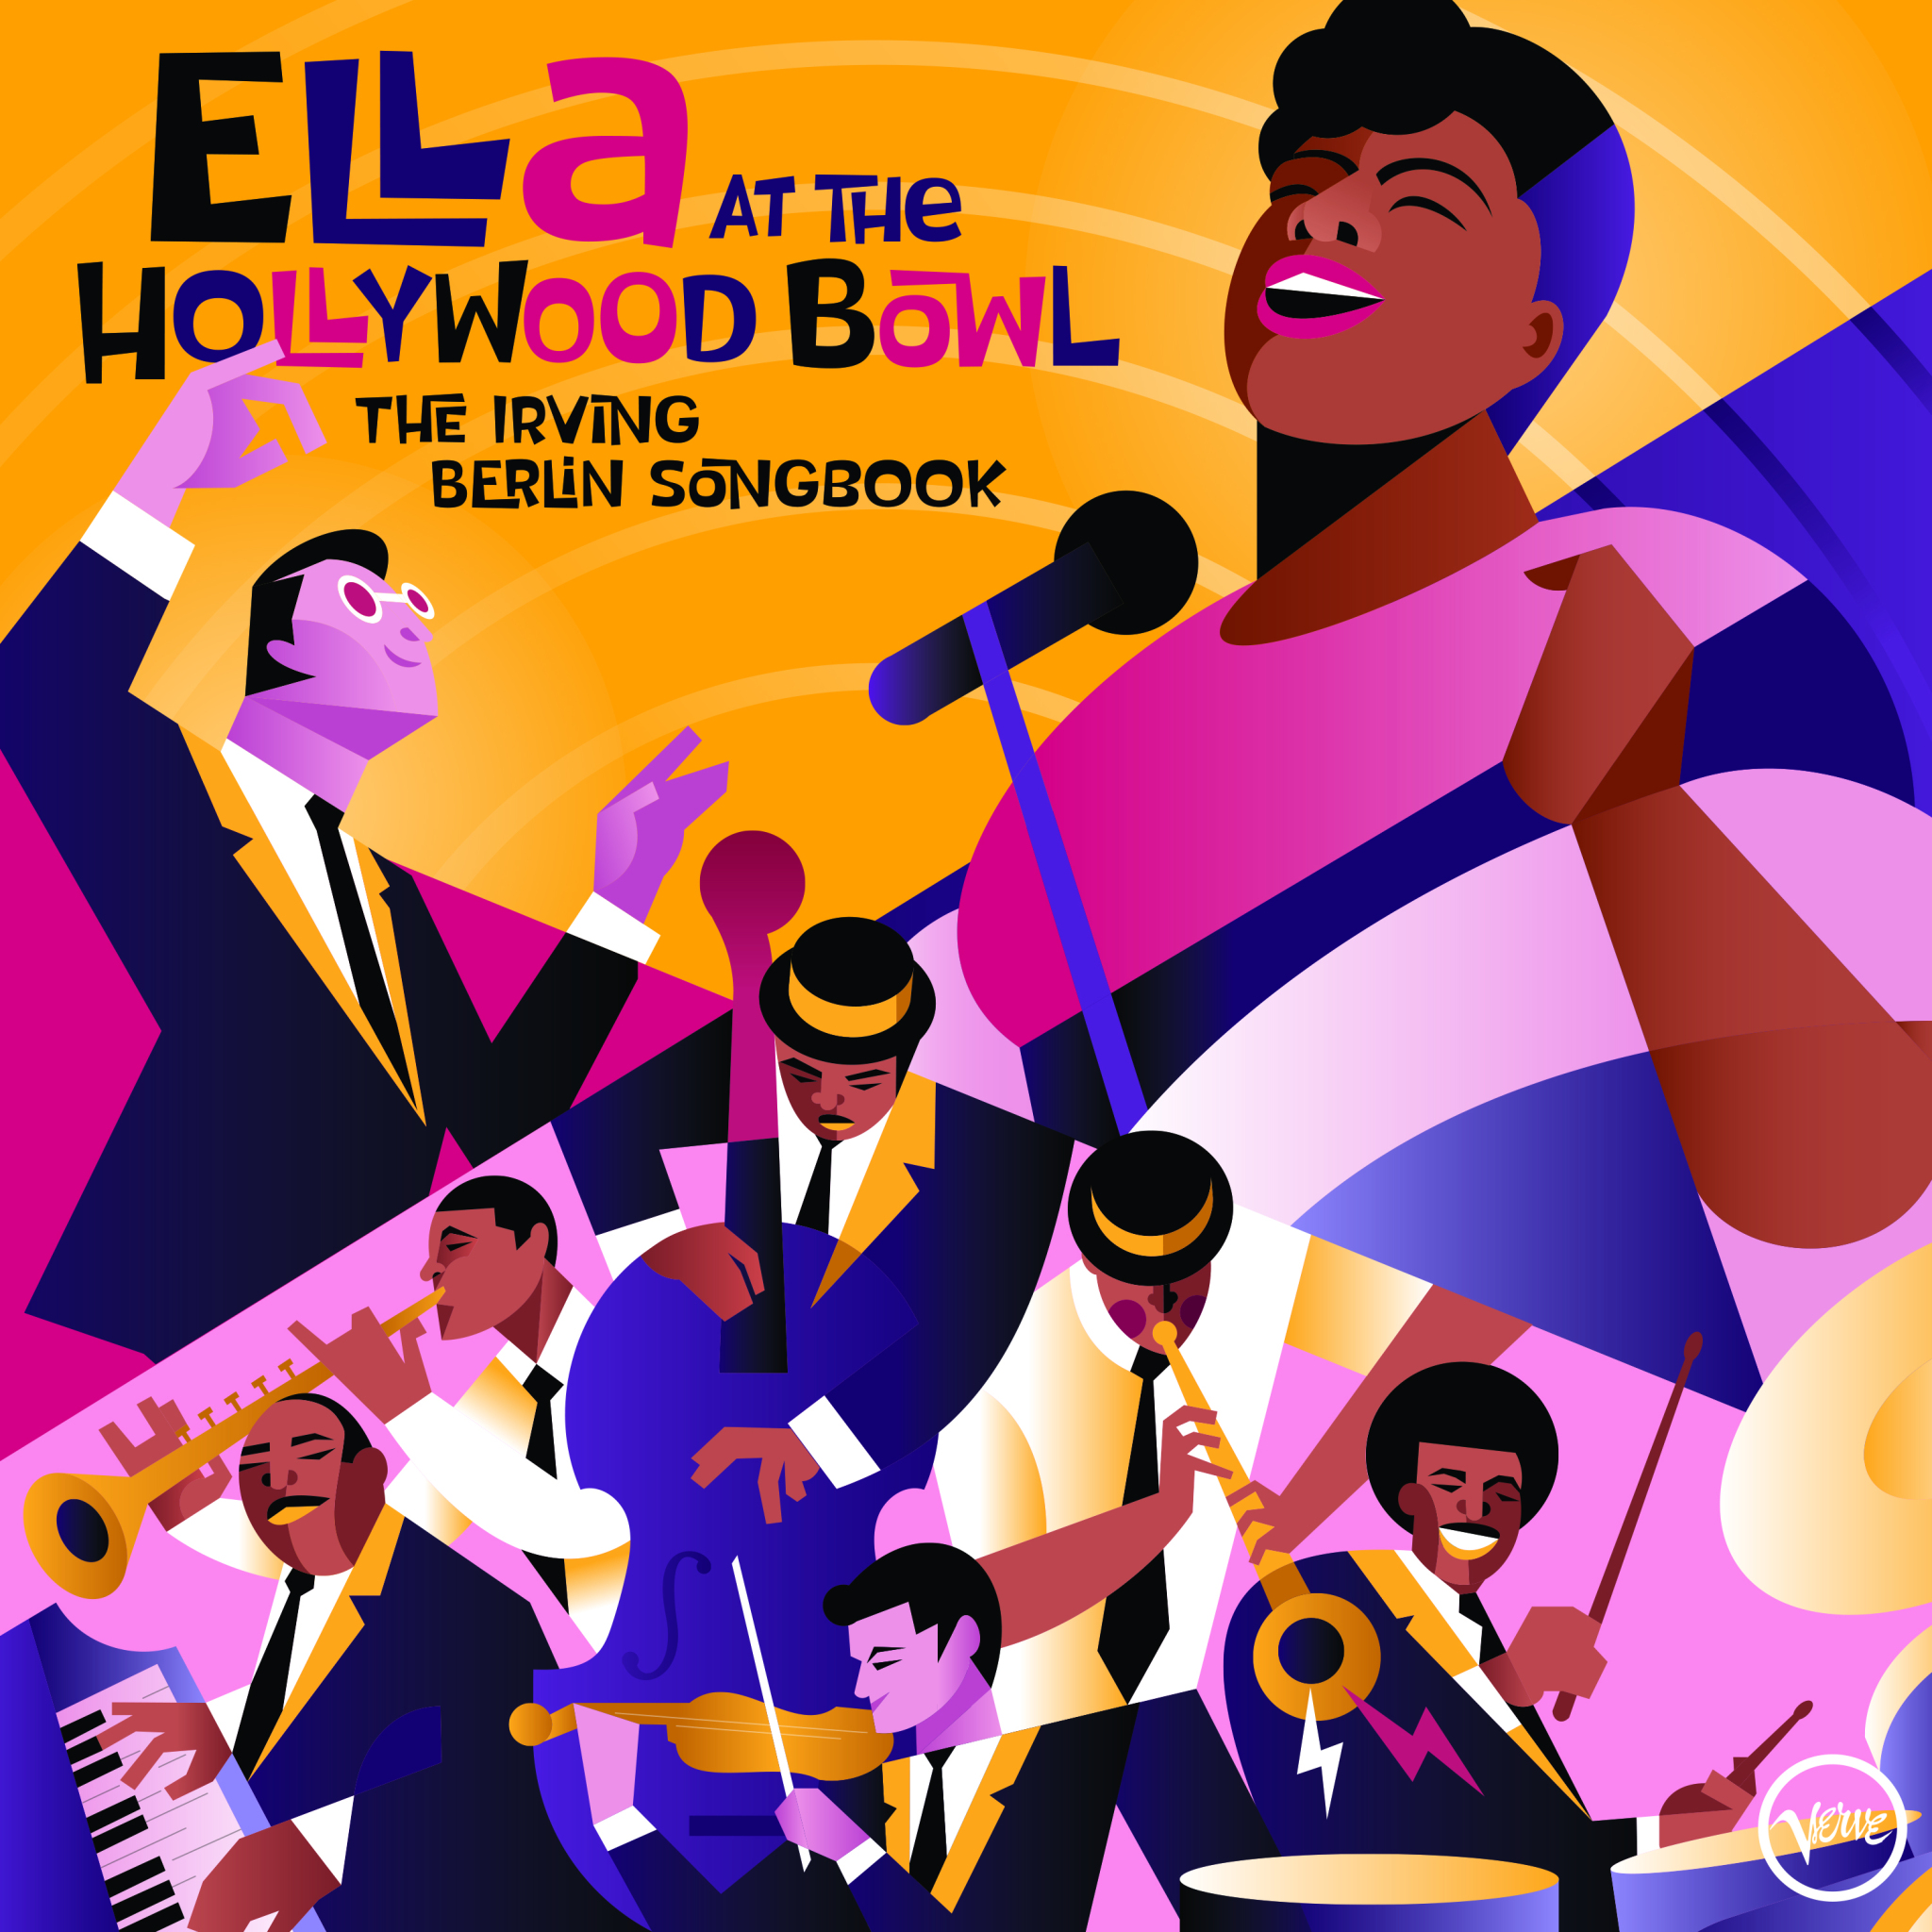 Unreleased Ella Fitzgerald Live Album, “Ella At The Hollywood Bowl: The Irving Berlin Songbook,” Due June 24 Via Verve/UMe; Animated Video For “Puttin’ On The Ritz” Out